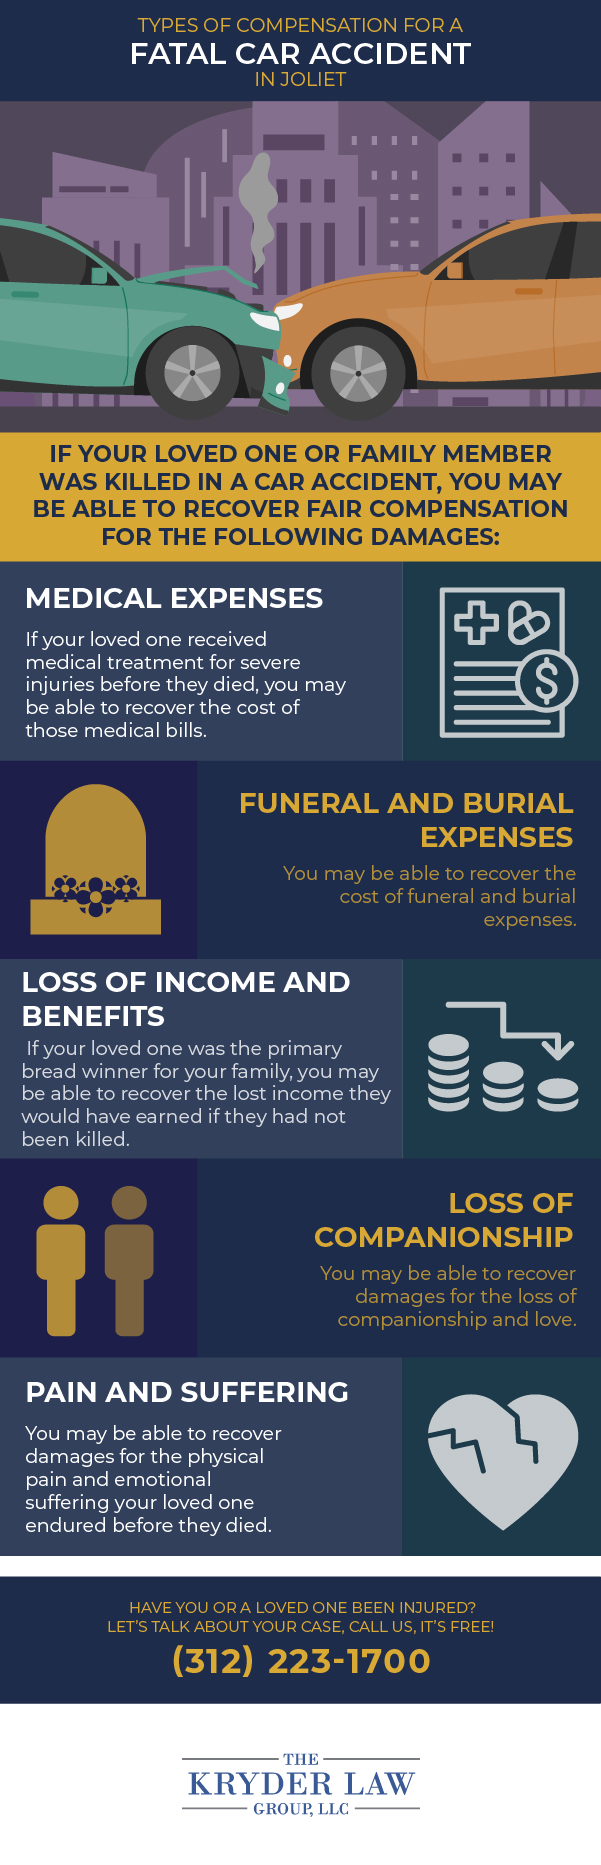 Types of Compensation for a Fatal Car Accident in Joliet